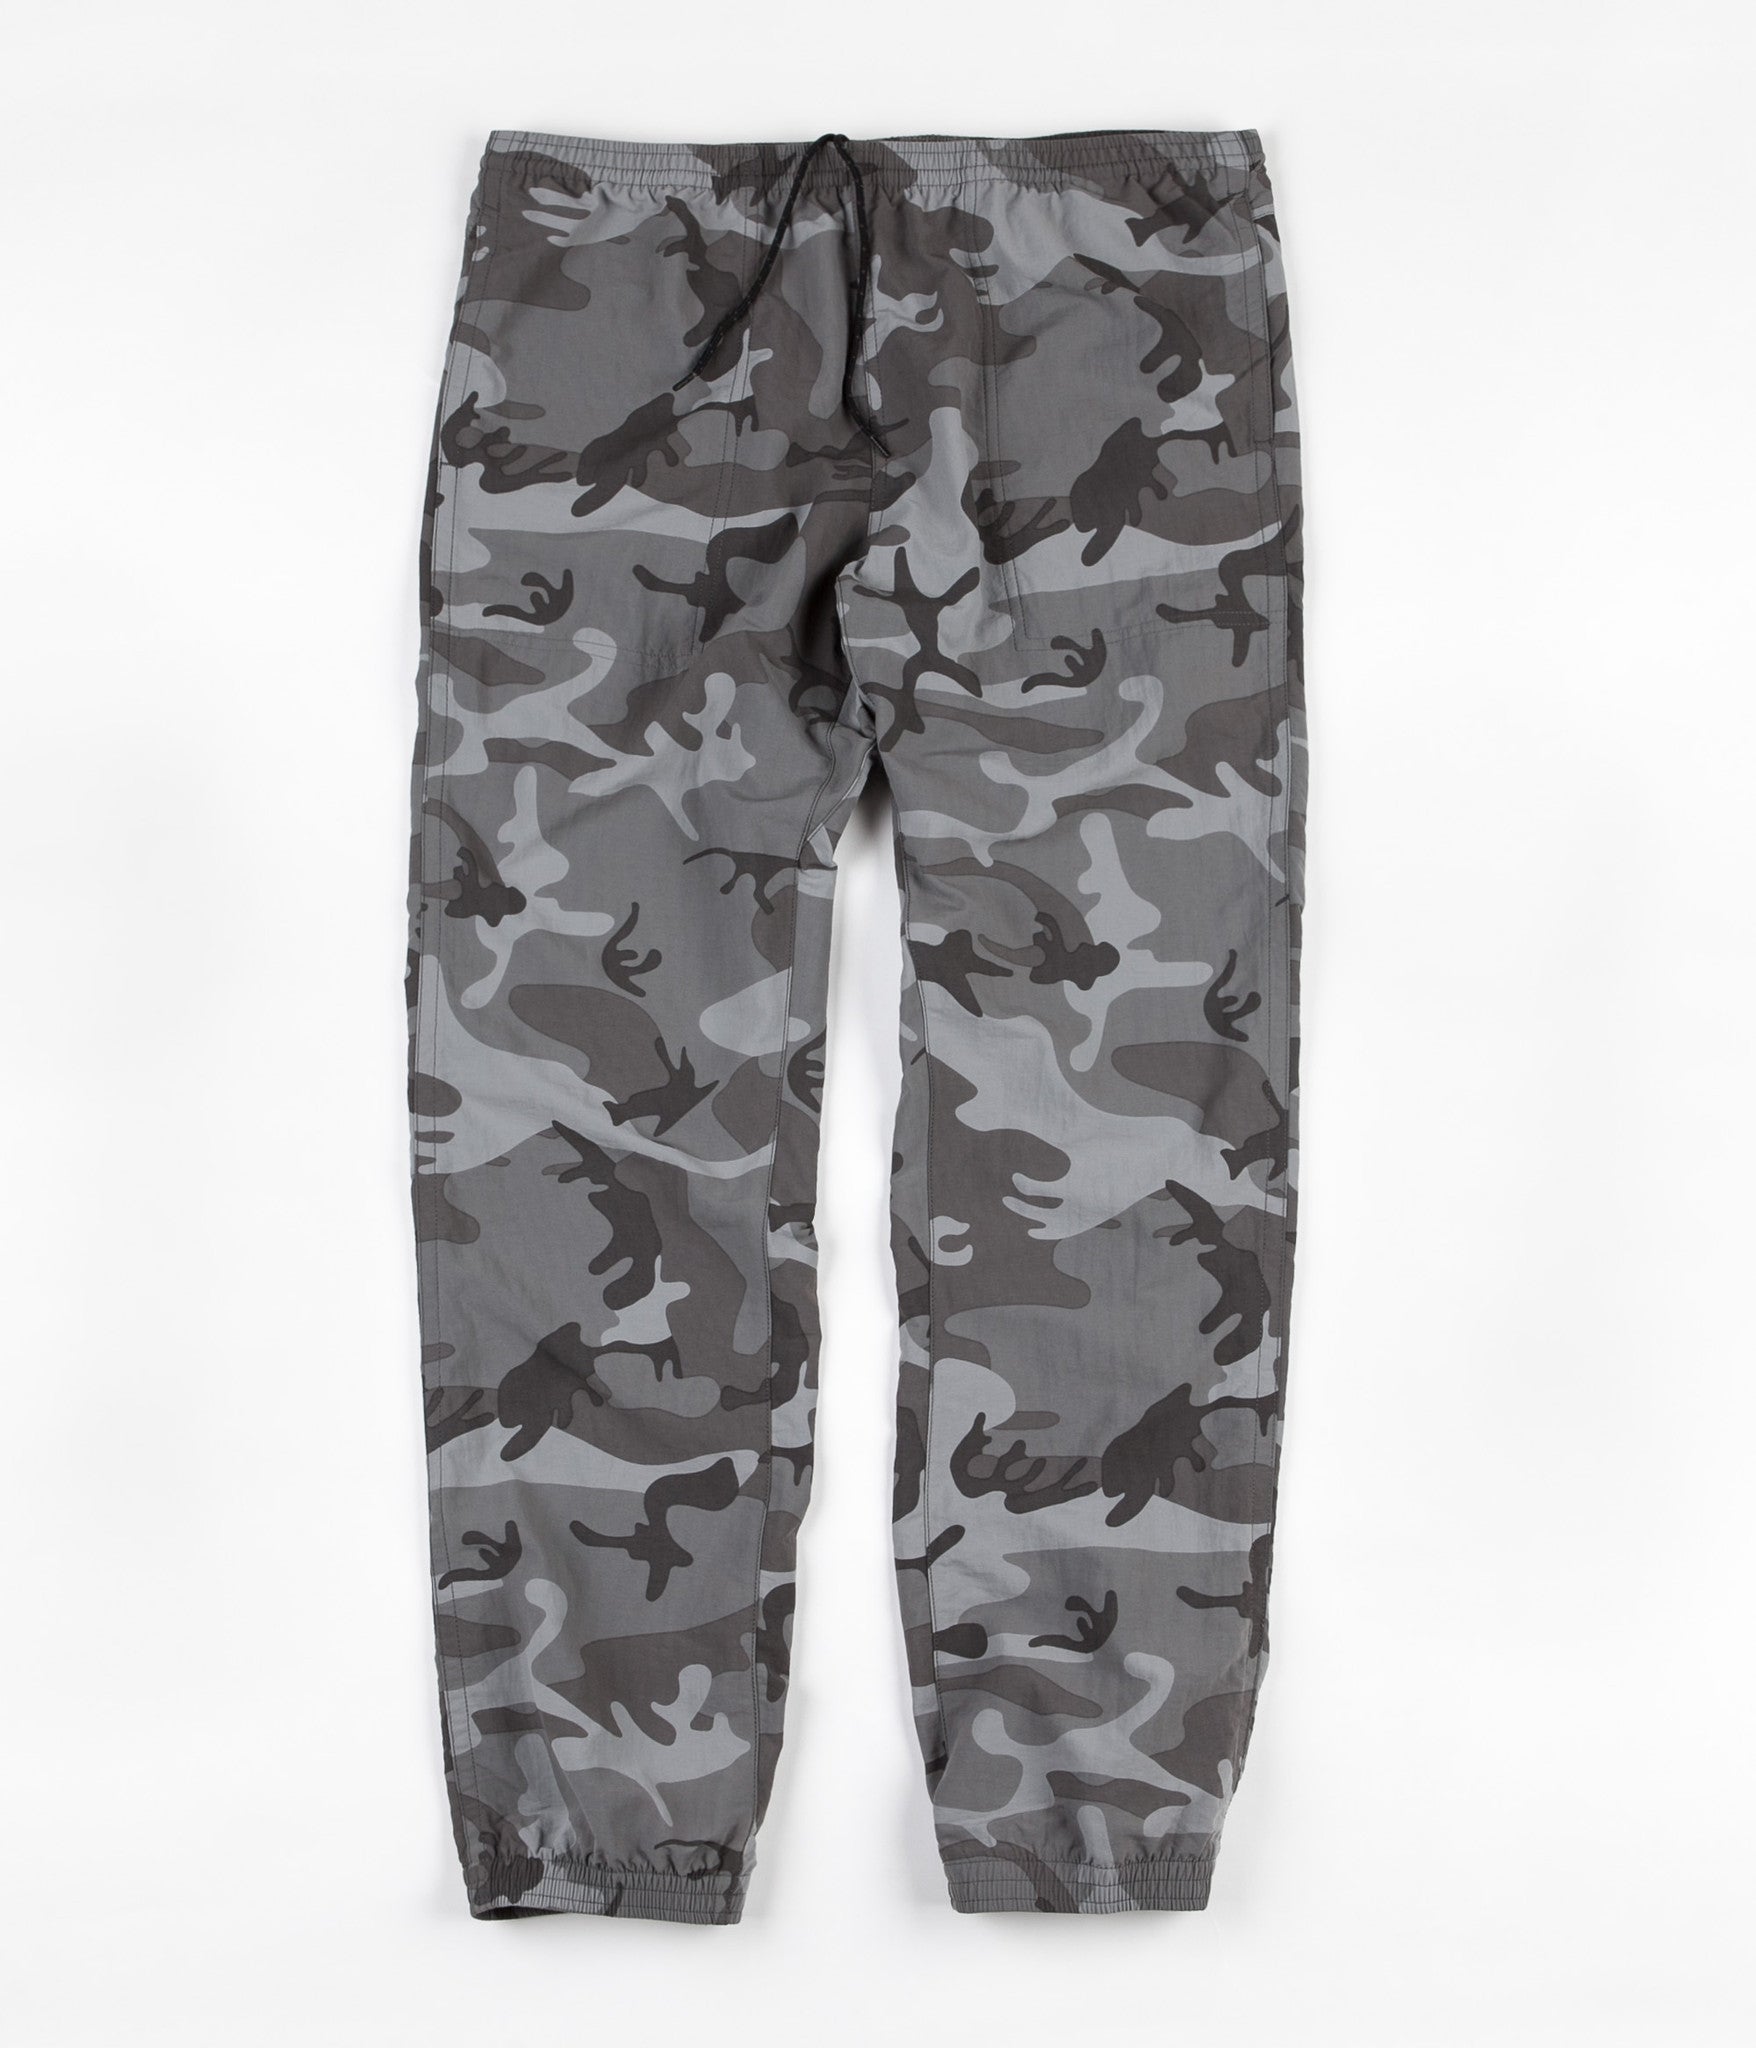 Patagonia Baggies Pants - Forest Camo / Forge Grey | Flatspot